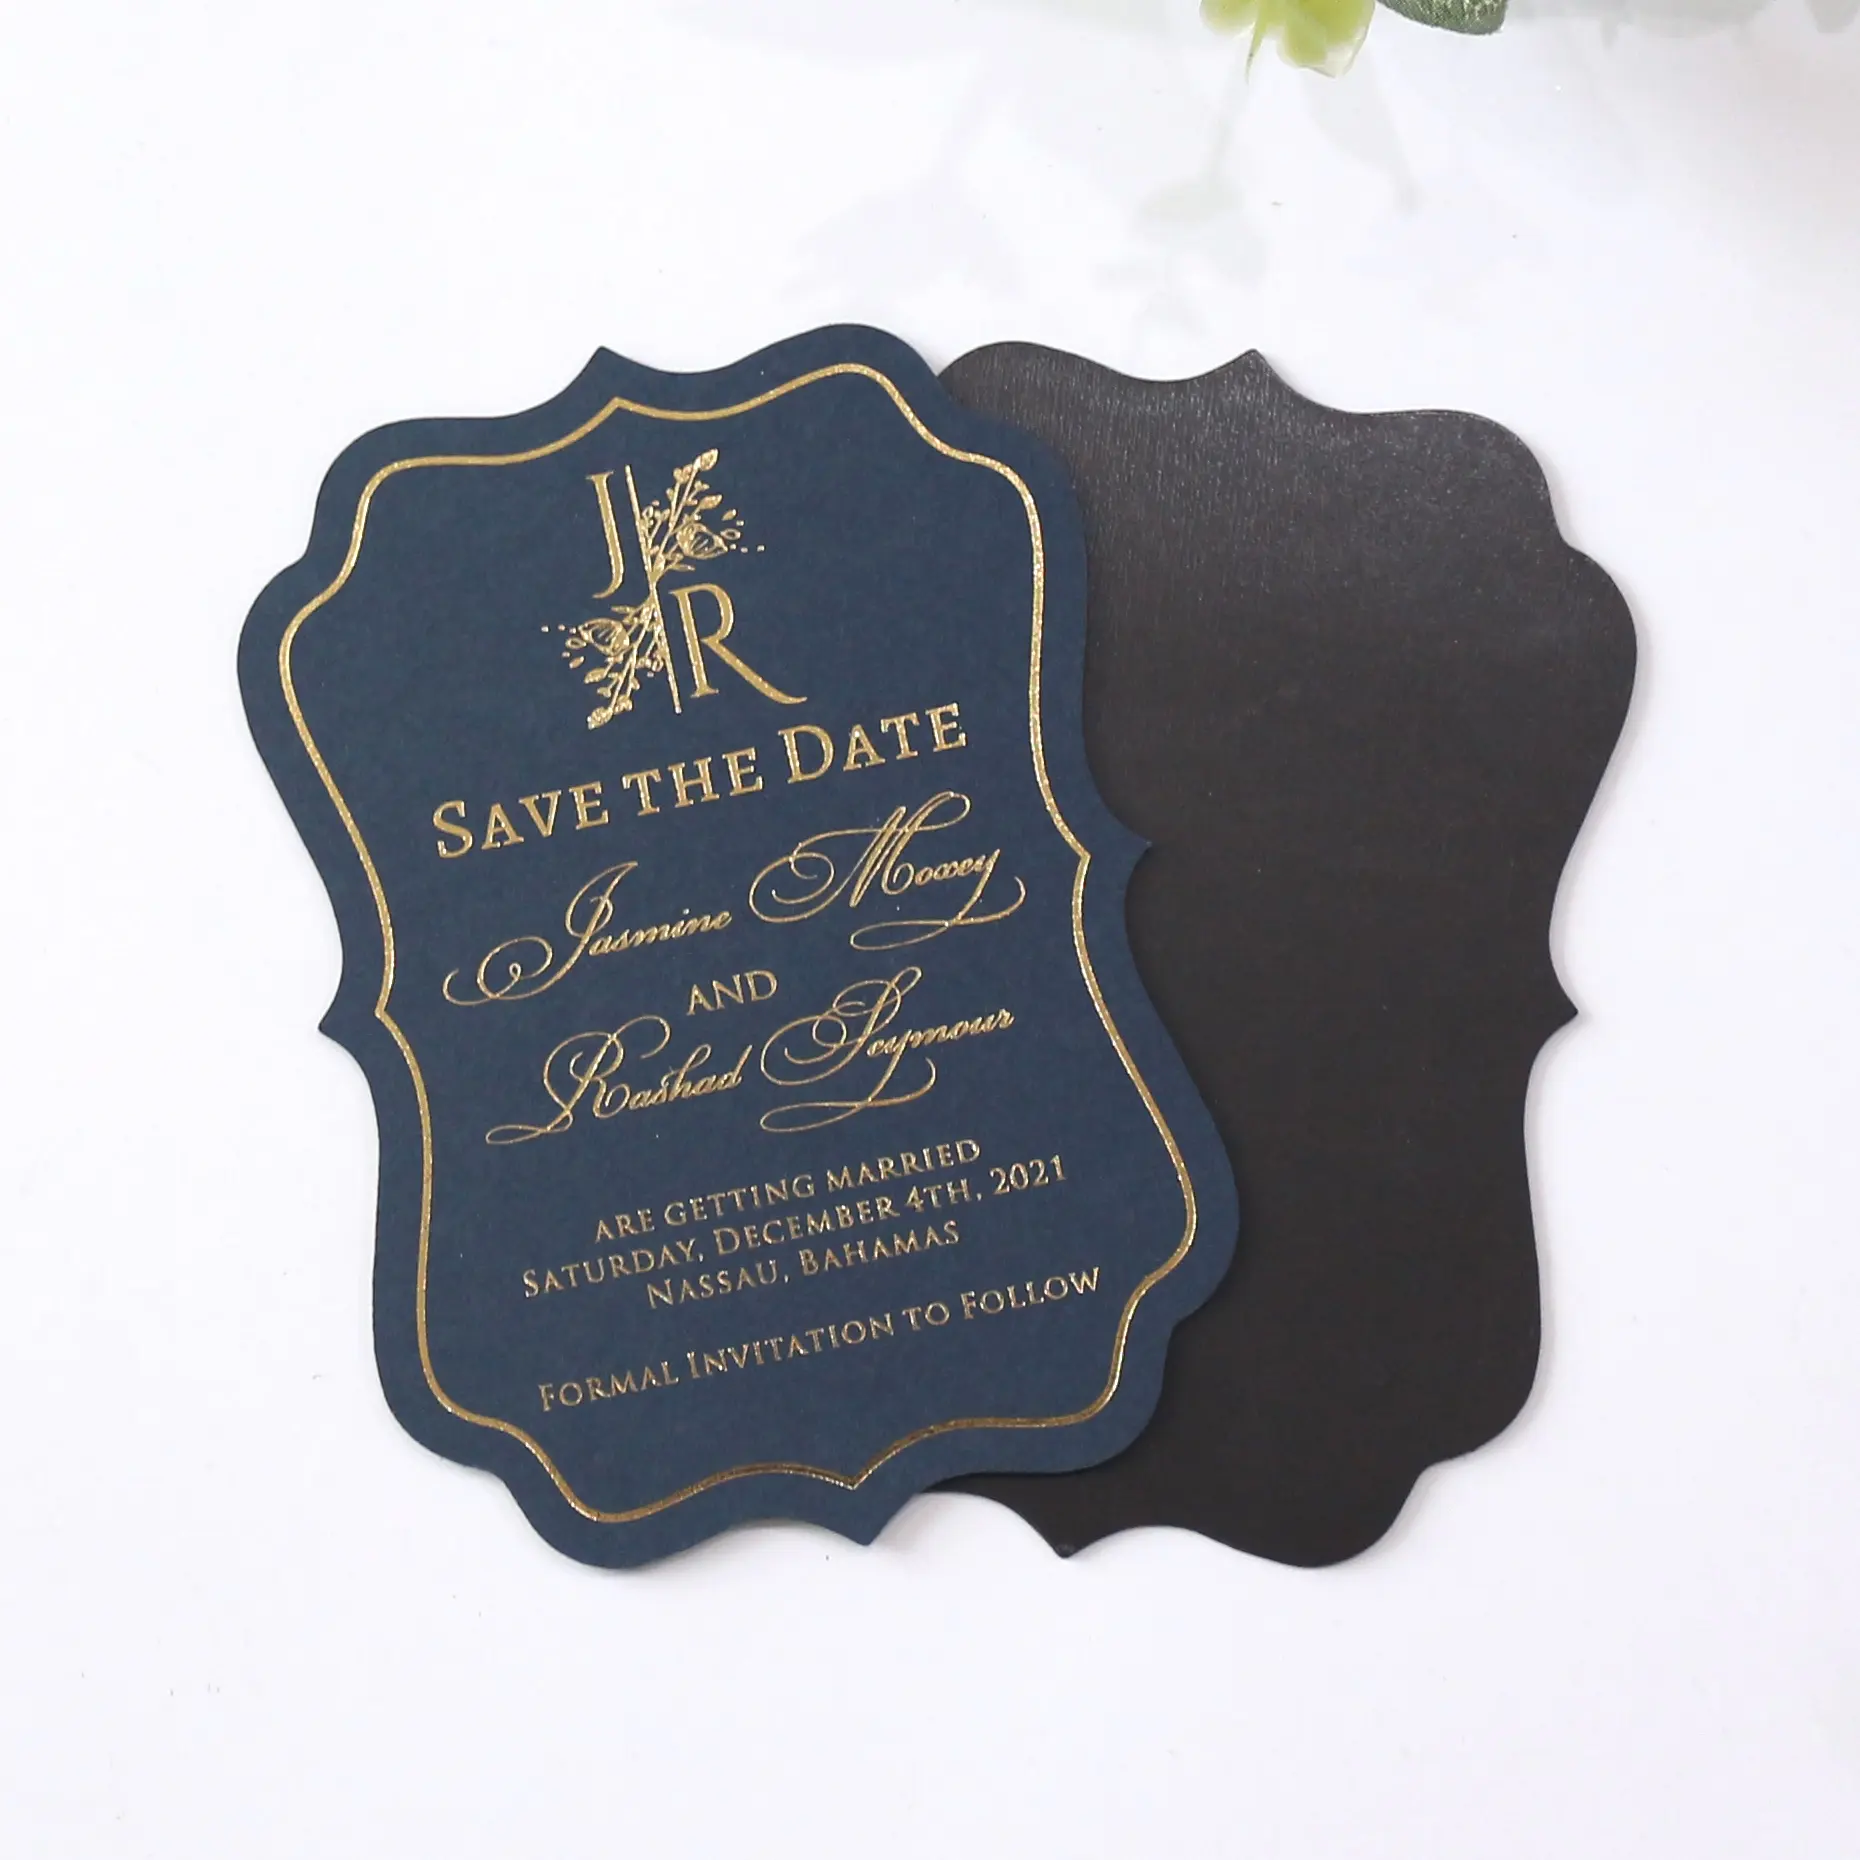 Wedding Souvenirs Magnets Invitation Cards Travel Crafts Fridge Magnets Save the Date Cards